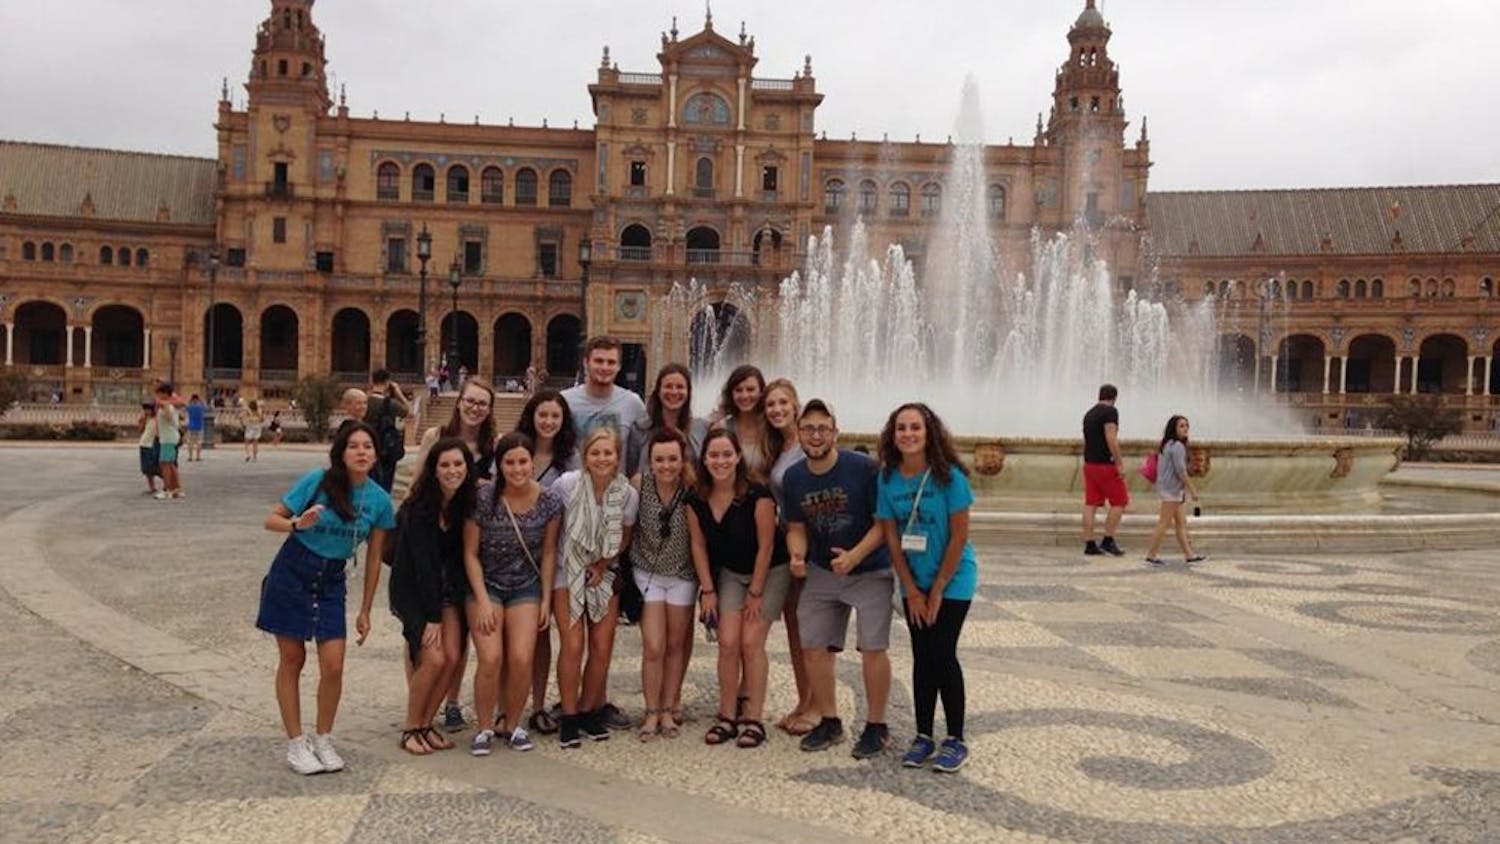 Students from the CIEE Communication, New Media, and Journalism program pose for a group picture during their first week in Seville at the Plaza de España. Now in their final week, the students take time to reflect on what they have learned and how they have grown from their semester abroad.